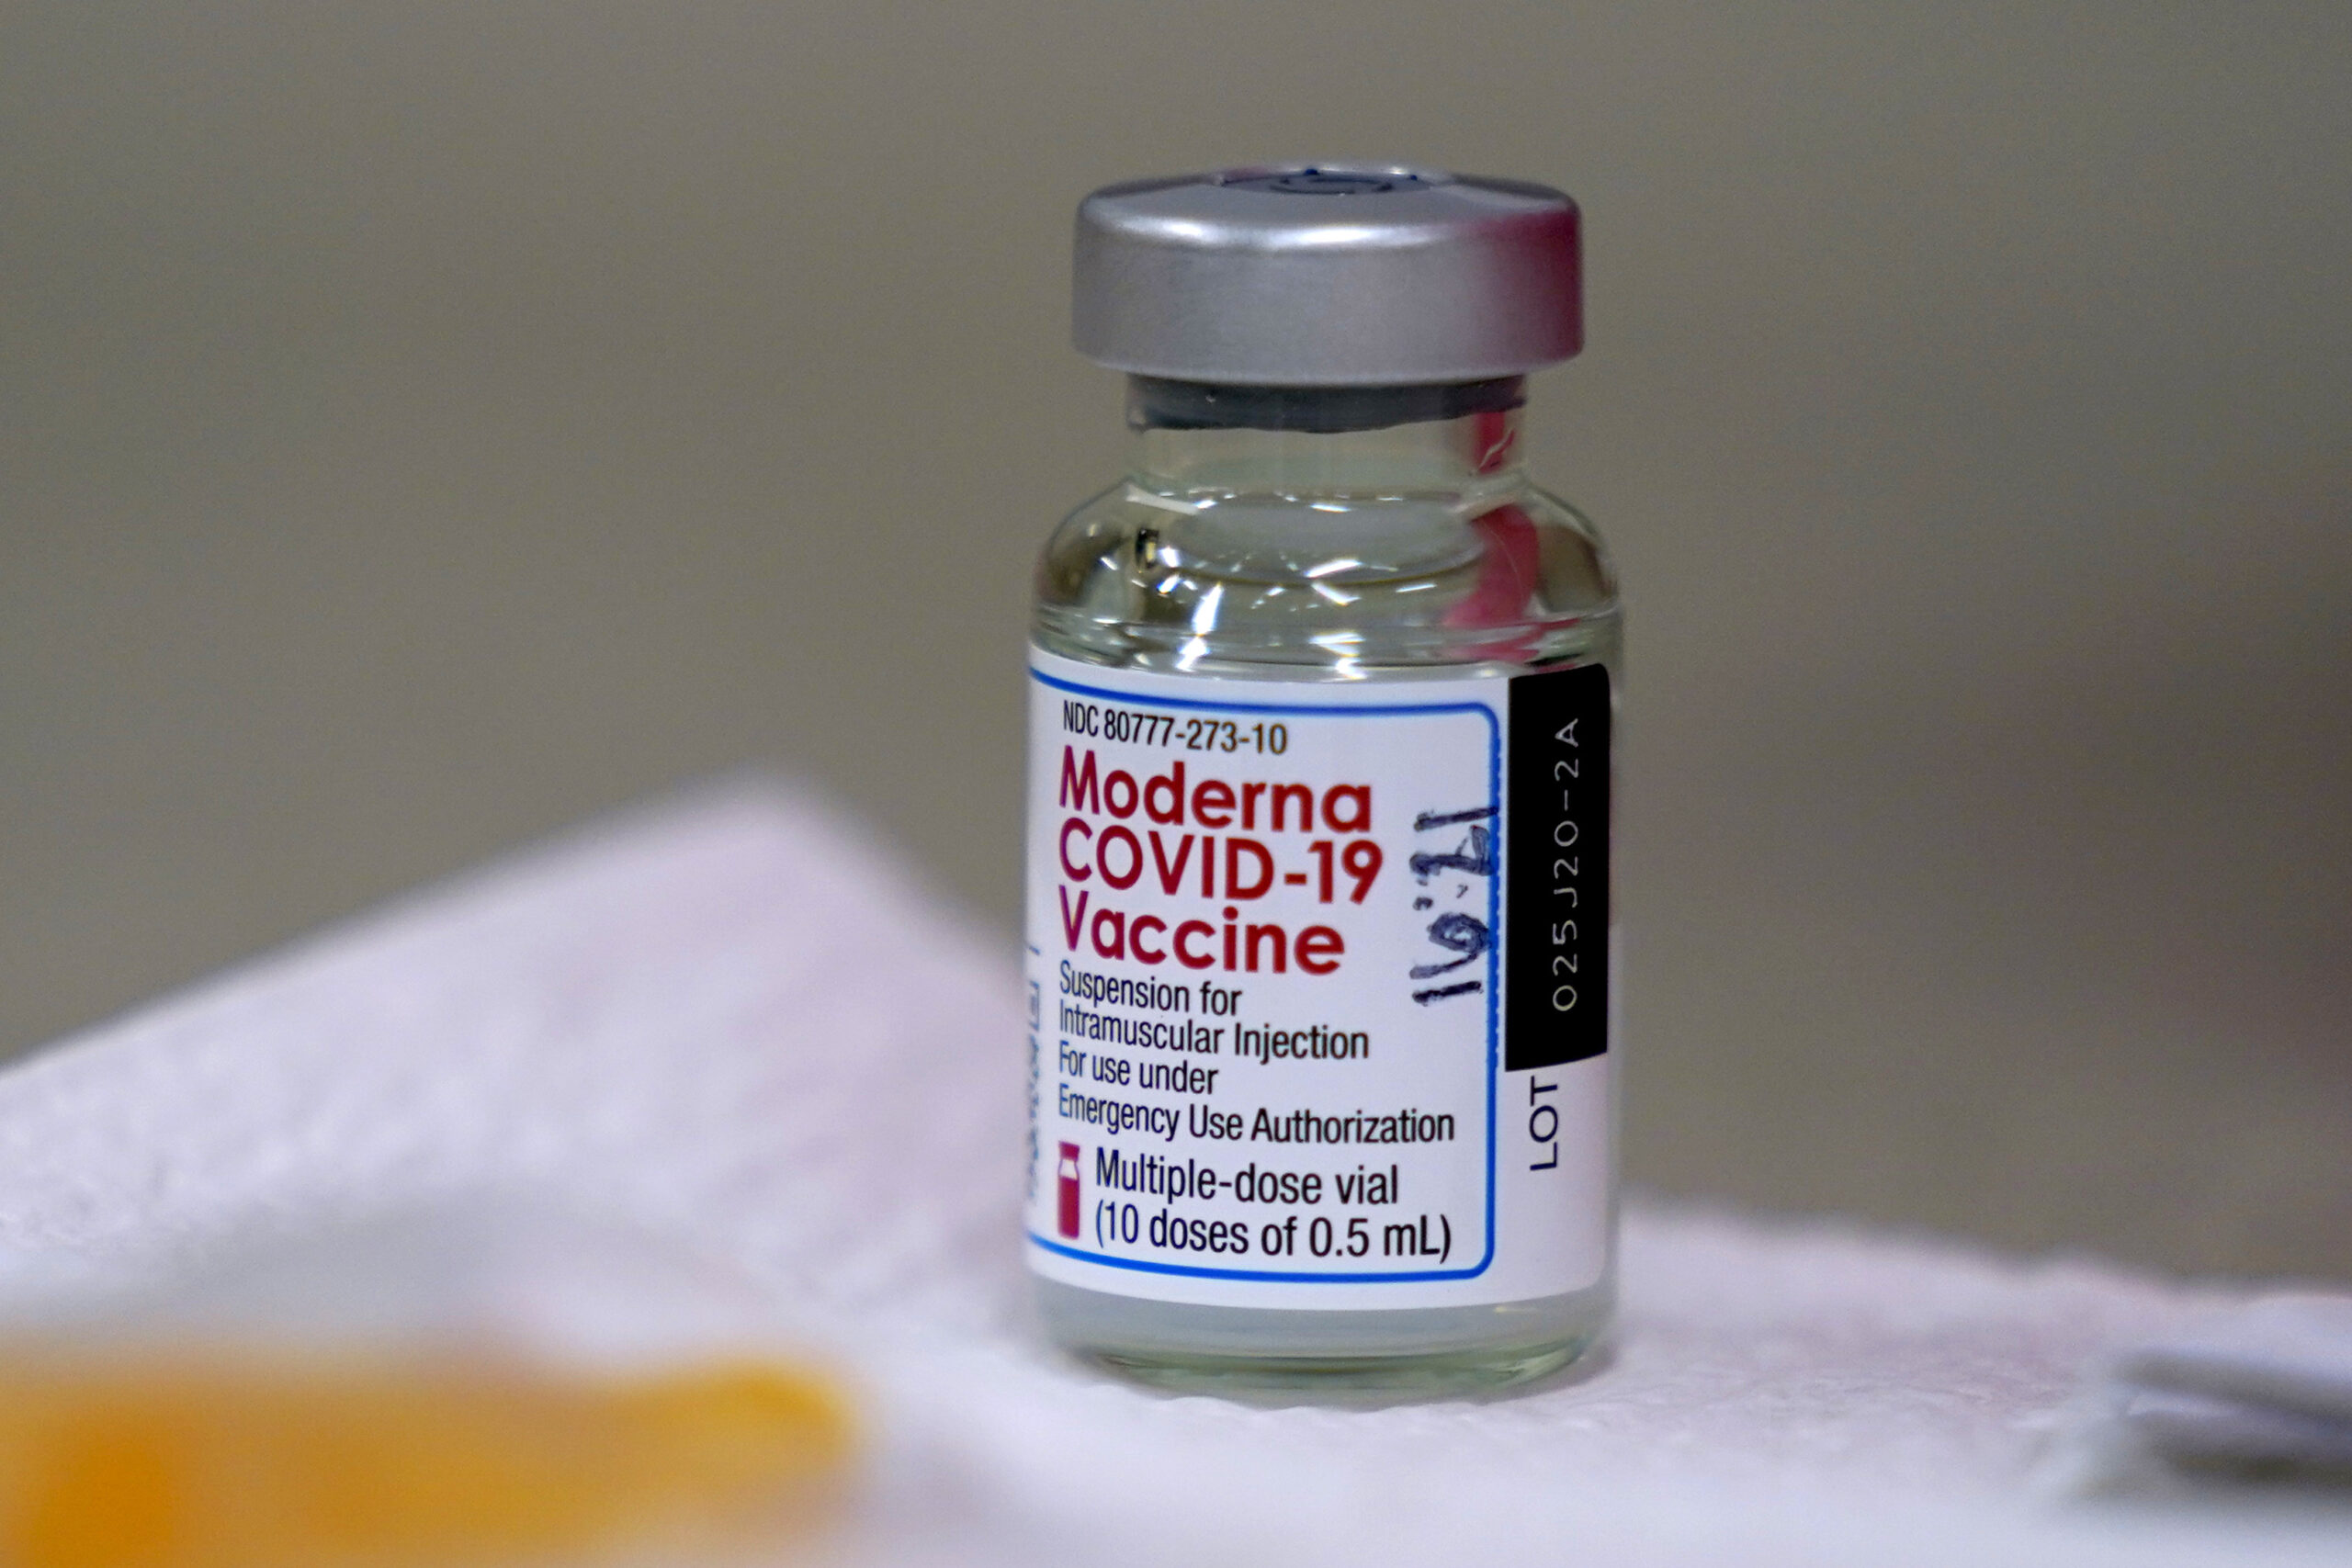 A bottle of Moderna's COVID-19 vaccine is seen on a table